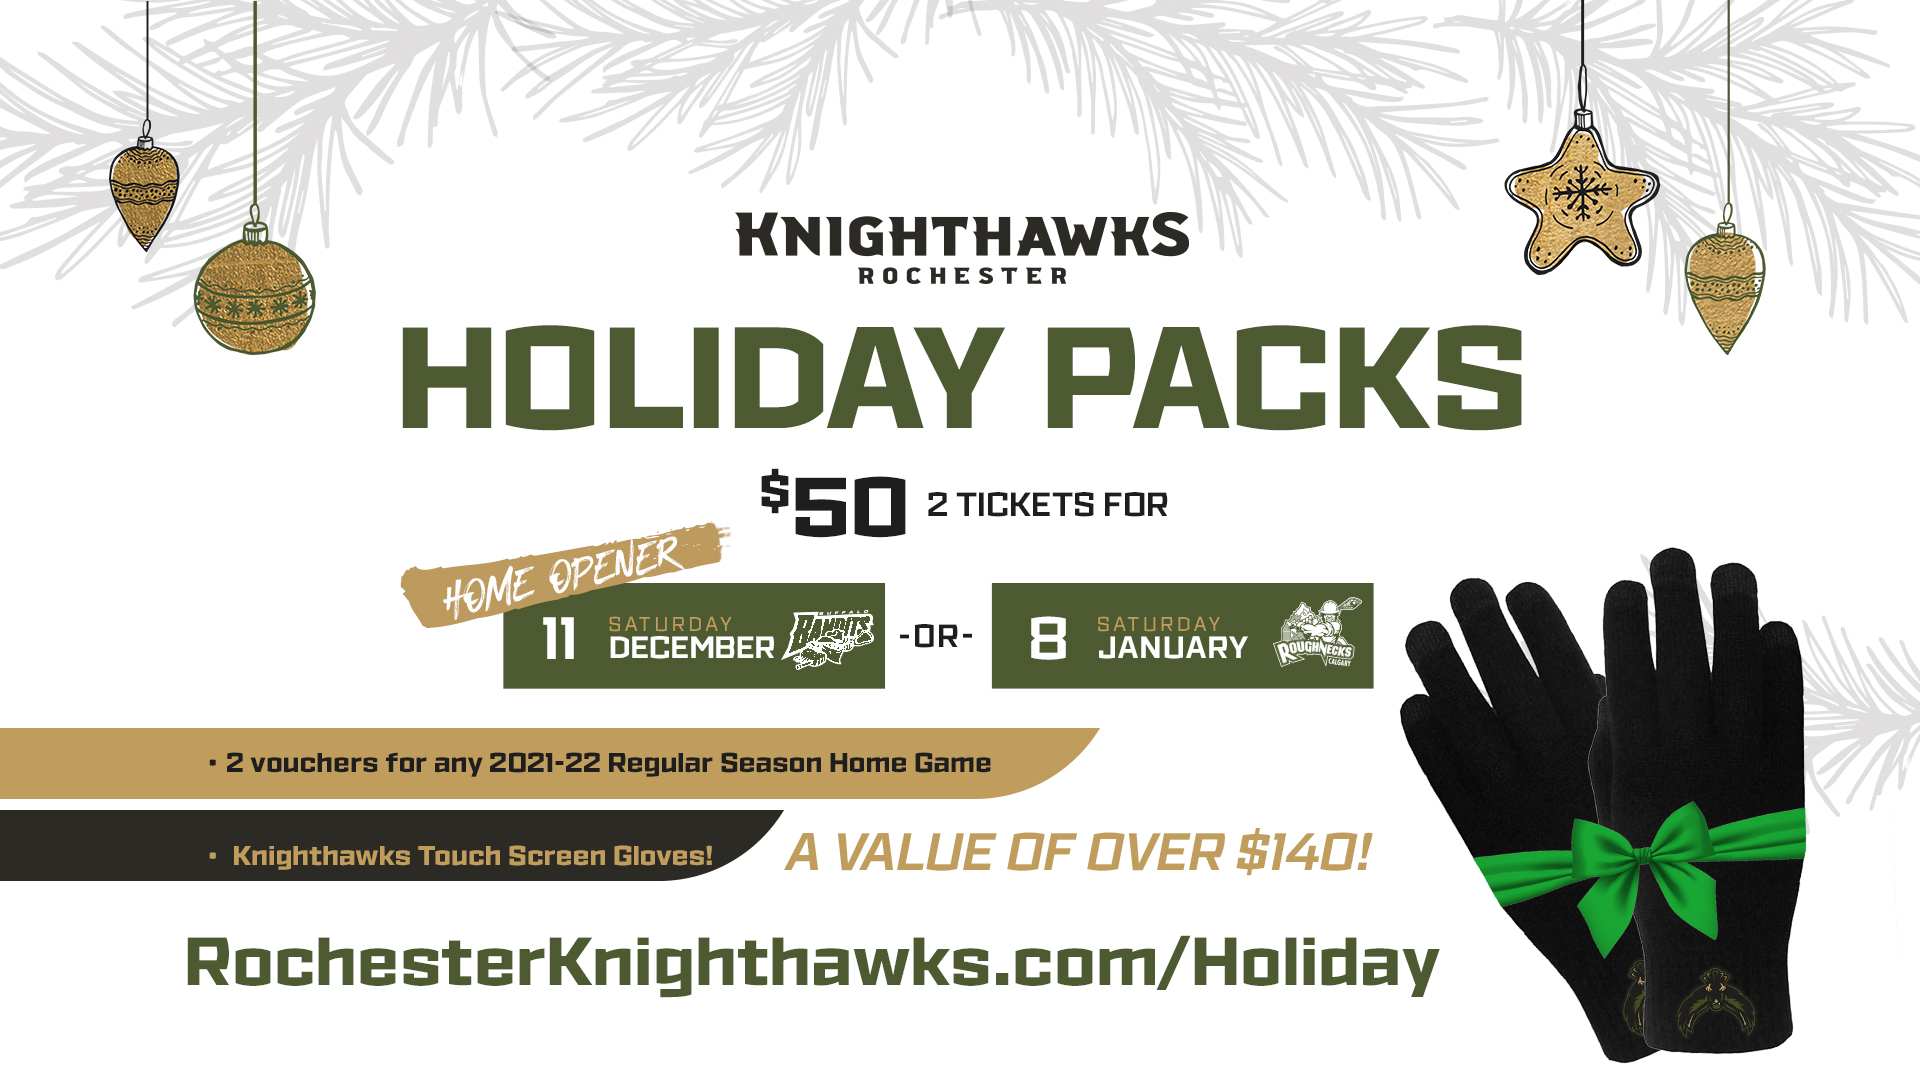 Knighthawks Holiday Packs On Sale Now Rochester Knighthawks Rochesterknighthawks Com